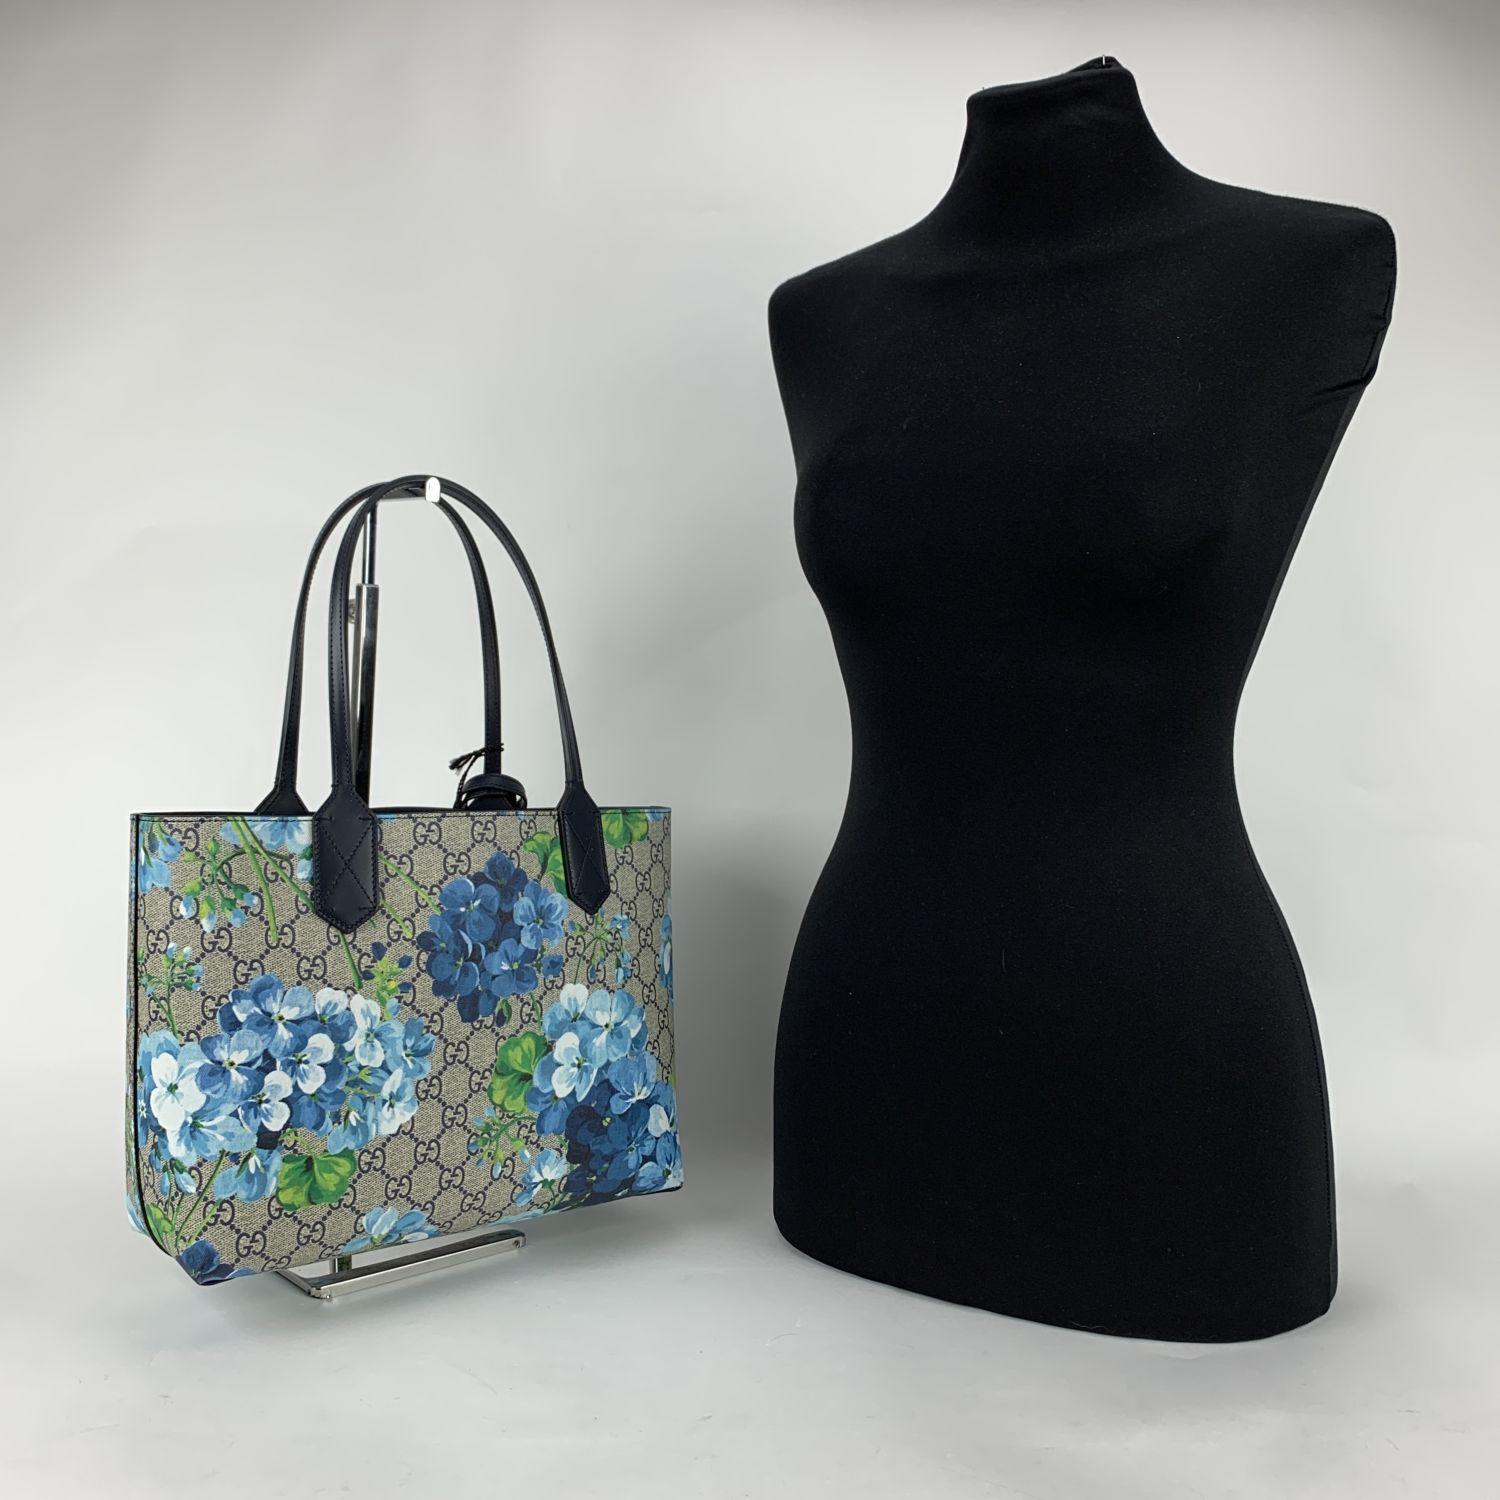 Beautiful Gucci reversible tote bag. The bag features a GG monogram Supreme canvas with Blooms print. on one side and blue leather on the other side. Open top. No interior pockets. Removable ID tag. Double handles. 'Gucci - Made in italy' engraved